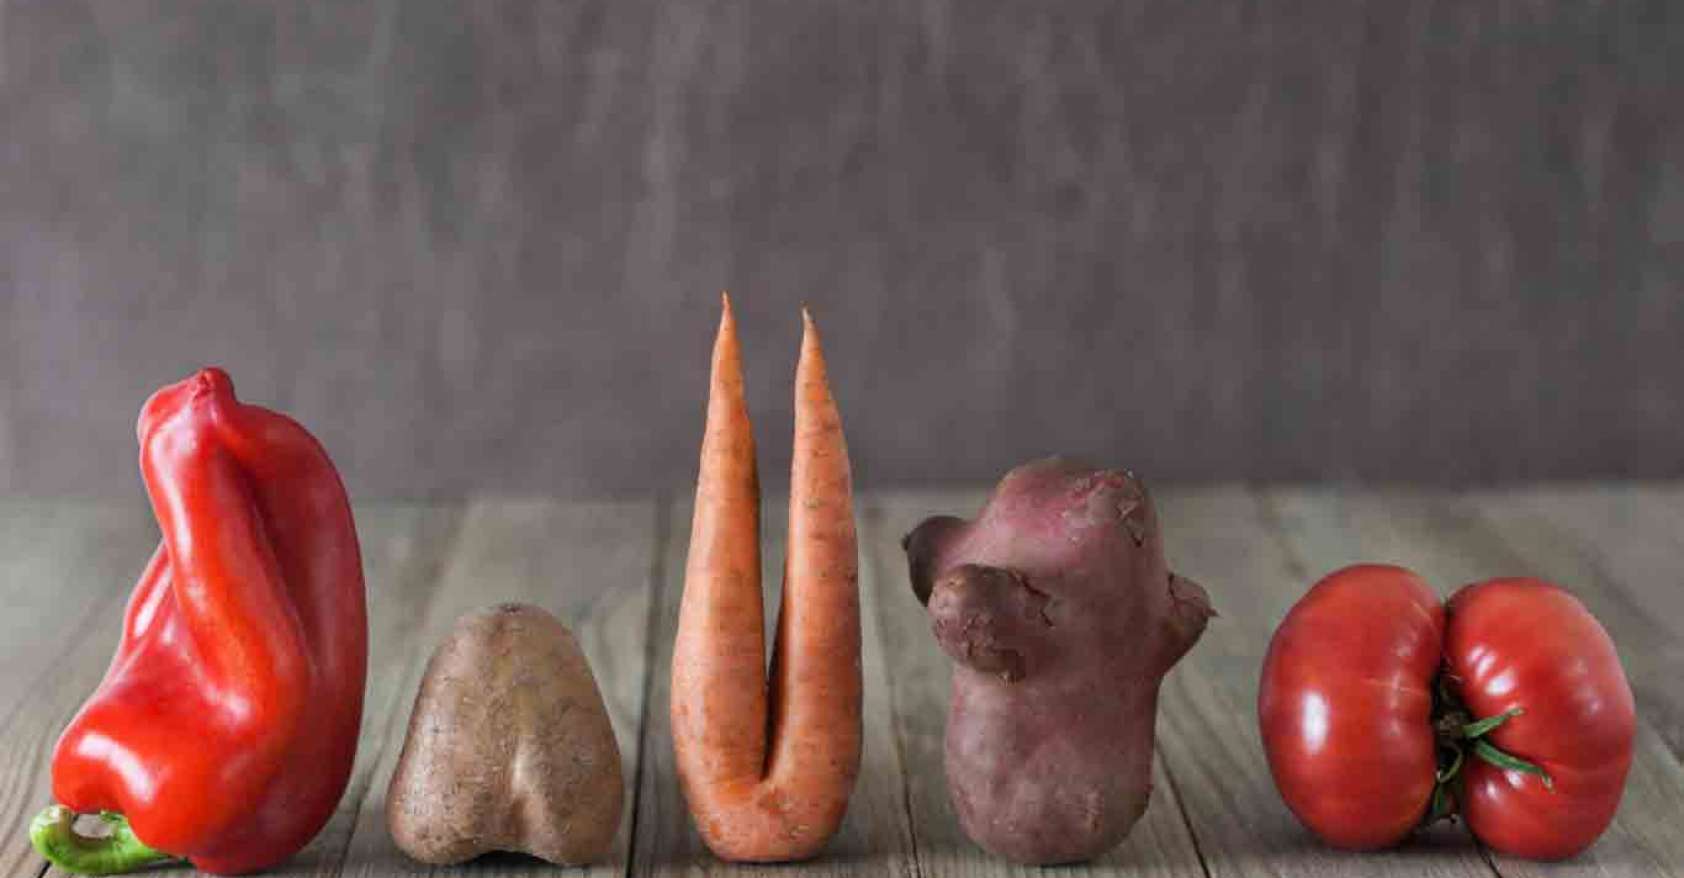 A bell pepper, potato, carrot with two "legs", sweet potato, and a tomato lined up on a wooden table with a brown wall behind them. They are representing ugly vegetables, imperfect vegetables.